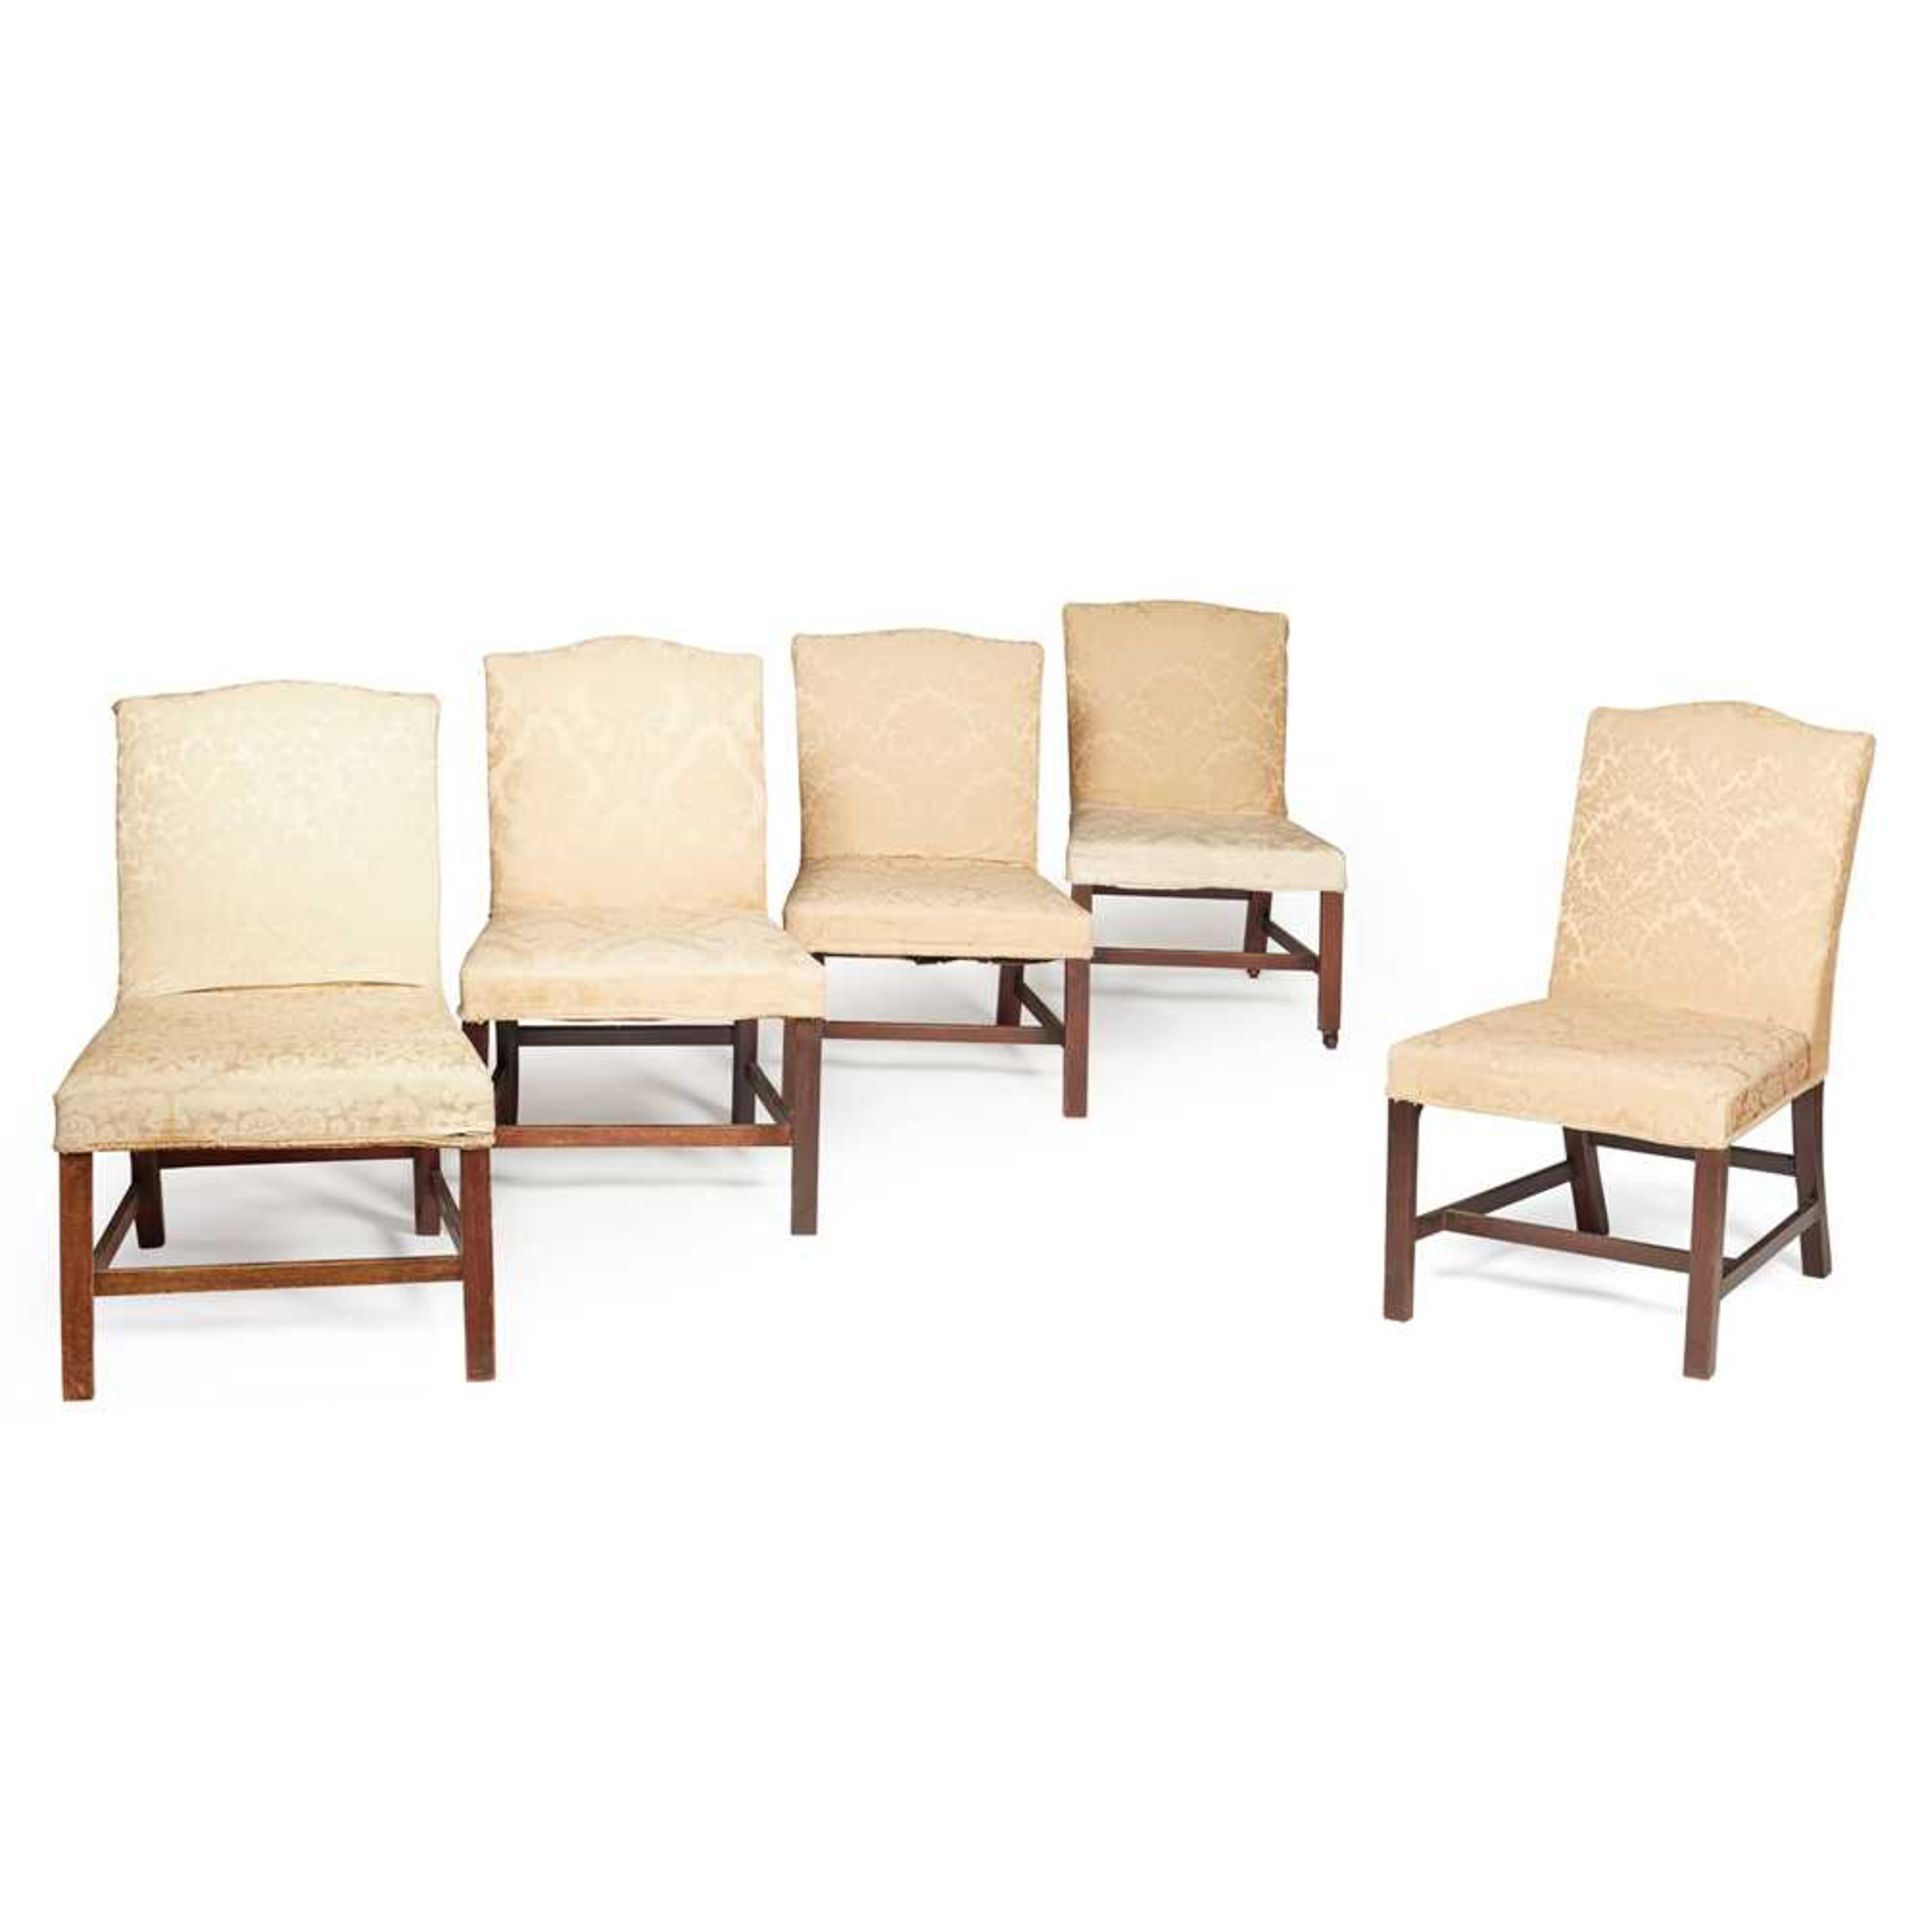 MATCHED SET OF FIVE GEORGE III UPHOLSTERED SIDE CHAIRS 18TH CENTURY